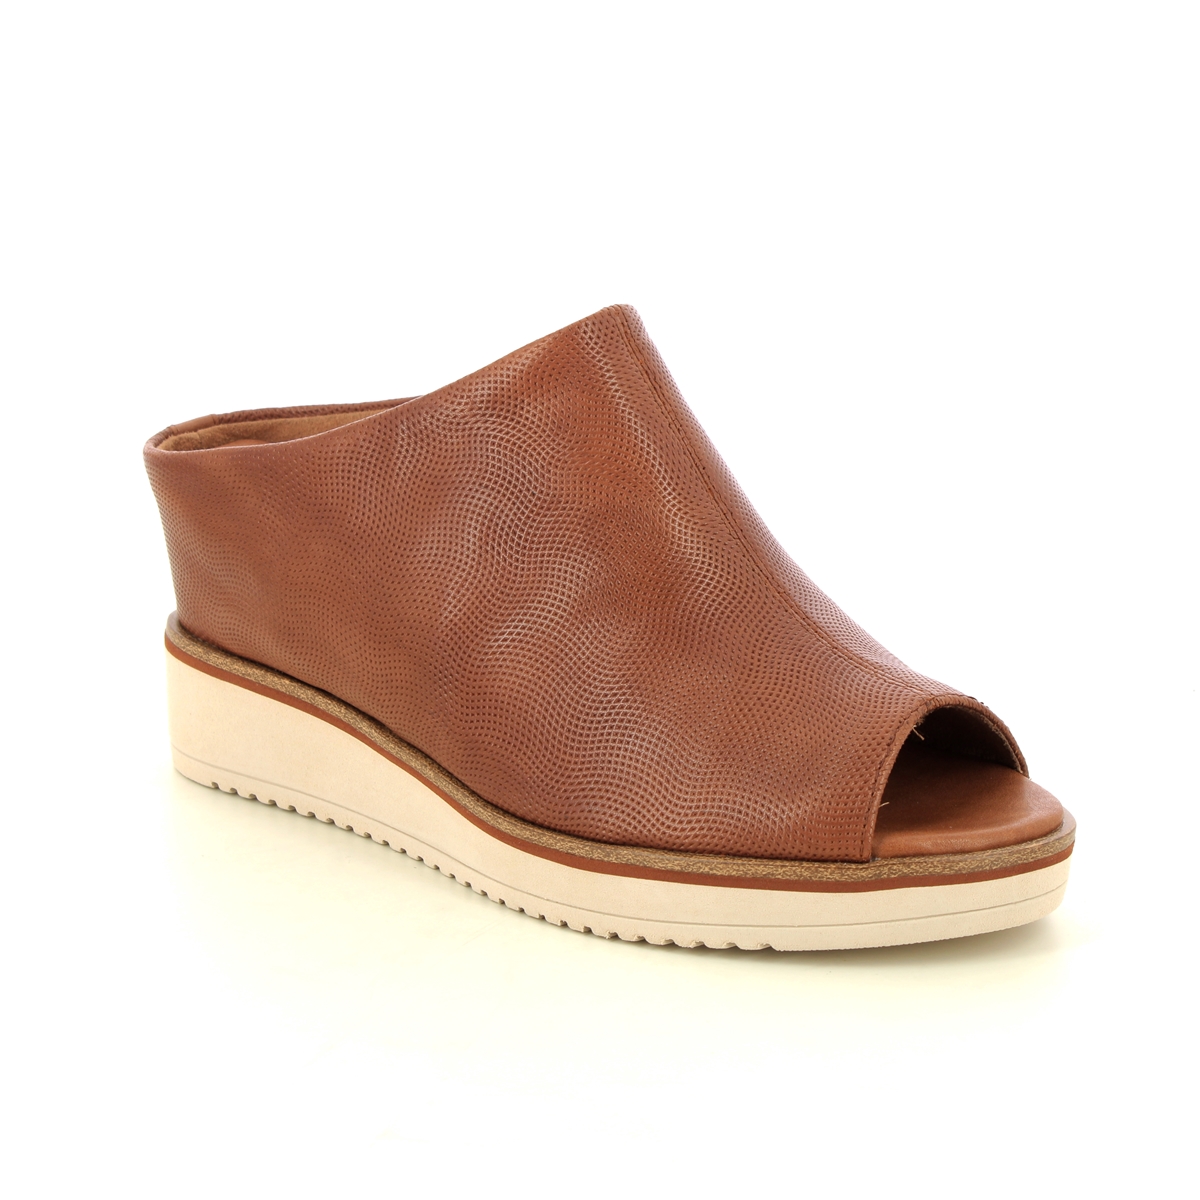 Tamaris Alis Slide Tan Leather Womens Wedge Sandals 27200-42-372 in a Plain Leather in Size 36